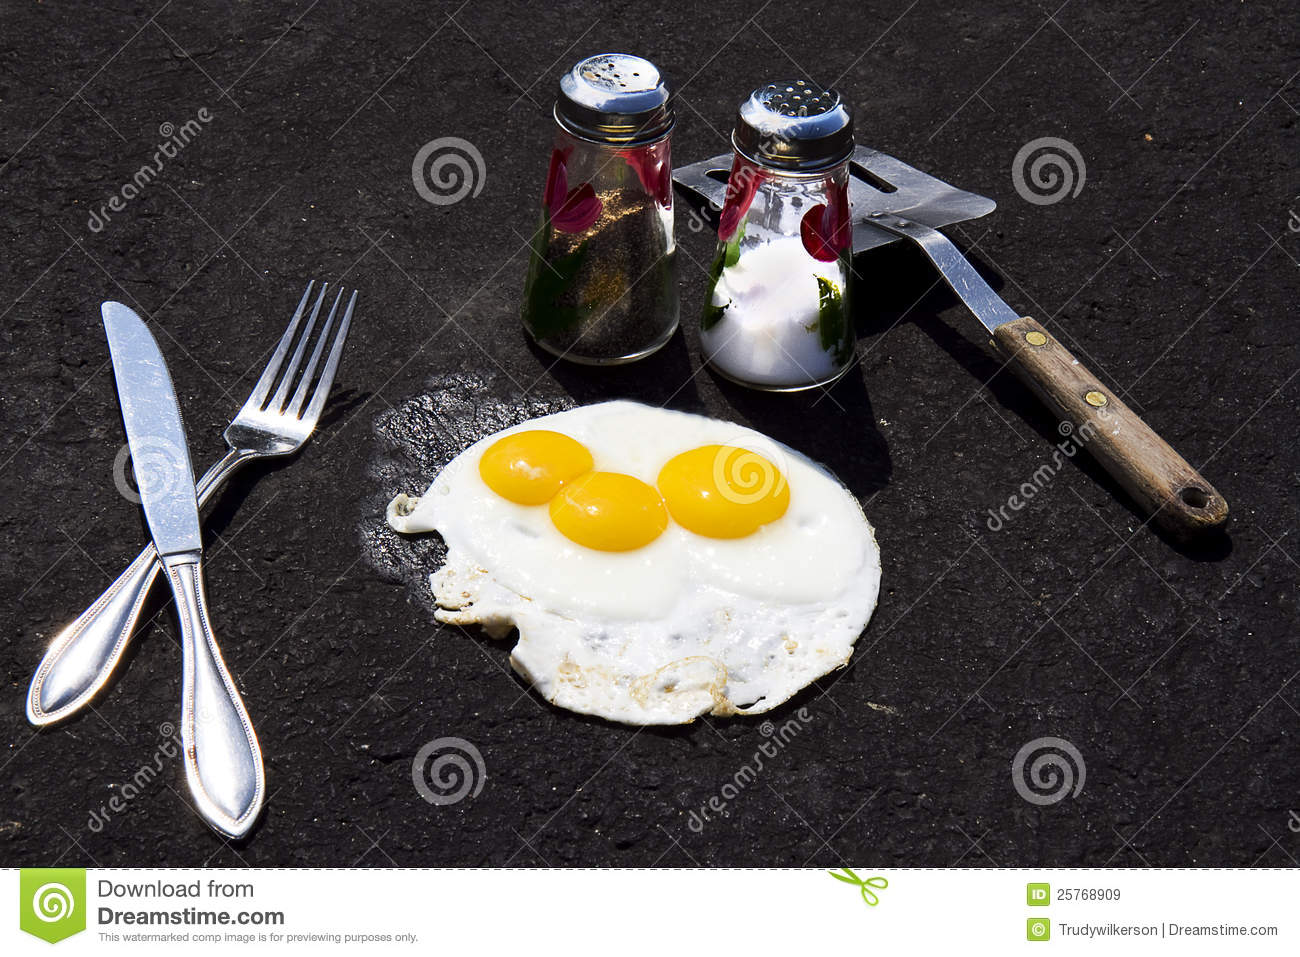 Concept Of Frying Eggs On Hot Sizzling Summer Day On Asphalt Driveway